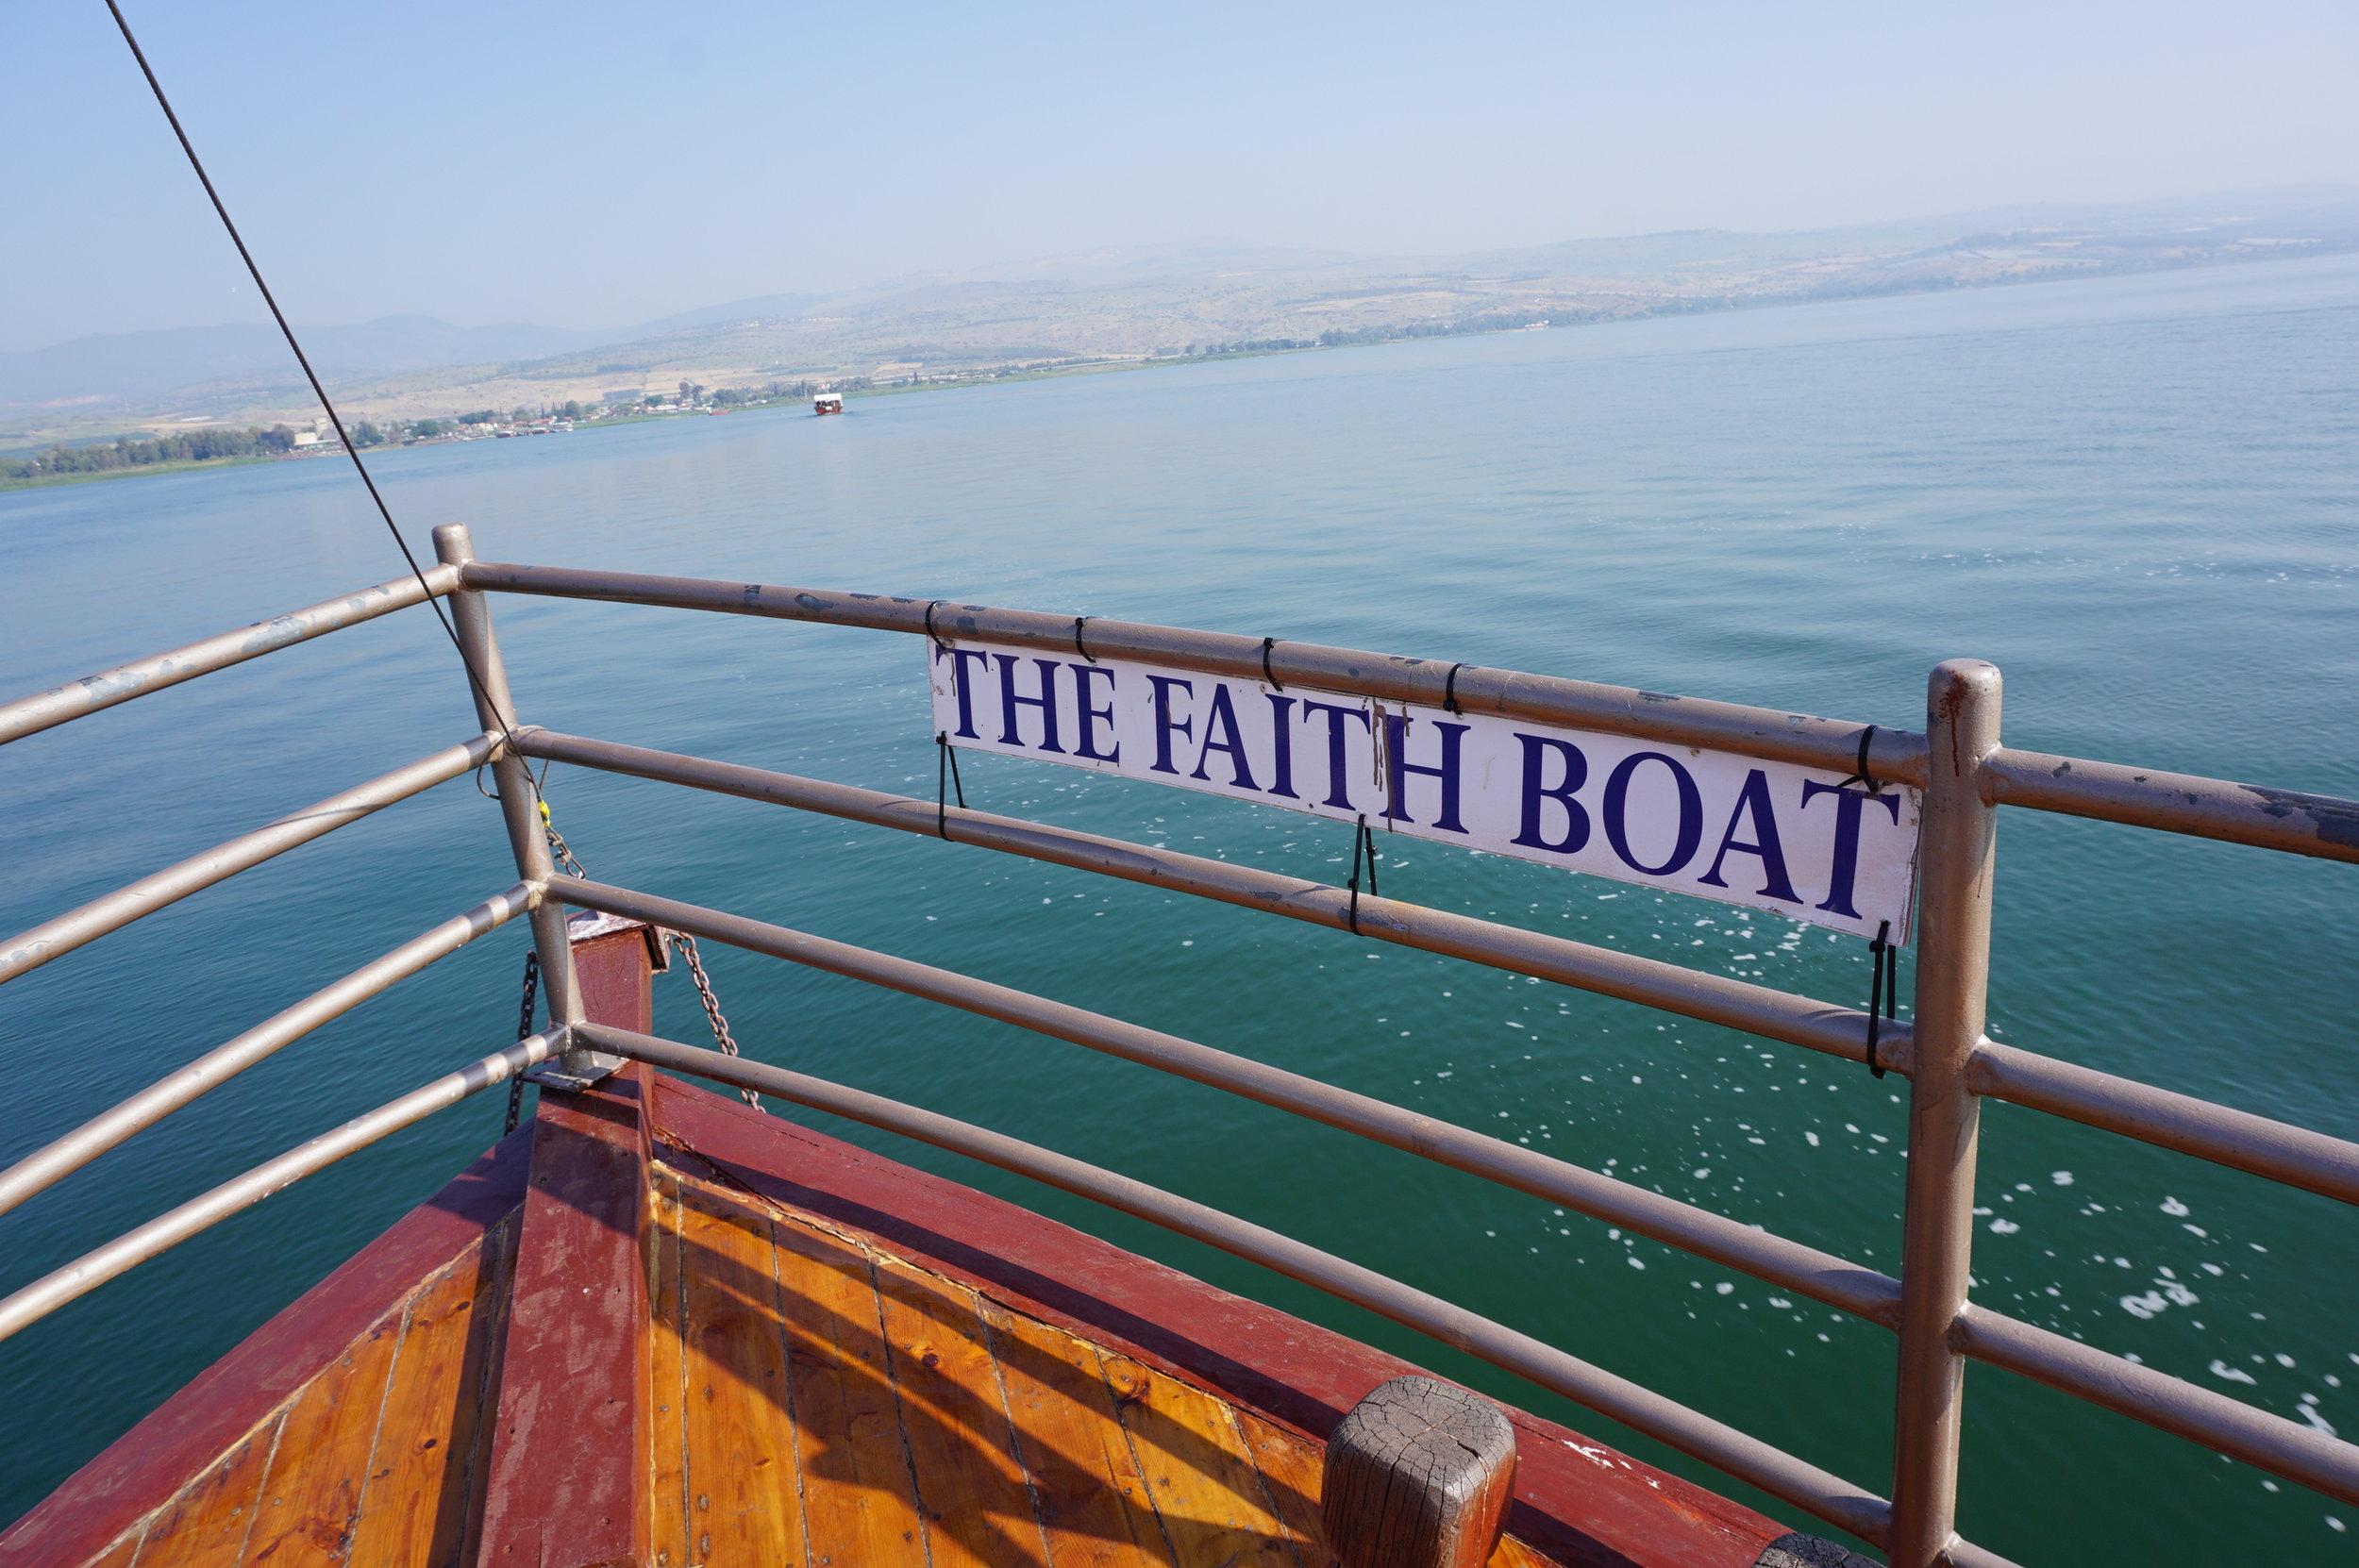 Boat ride on the Sea of Galilee